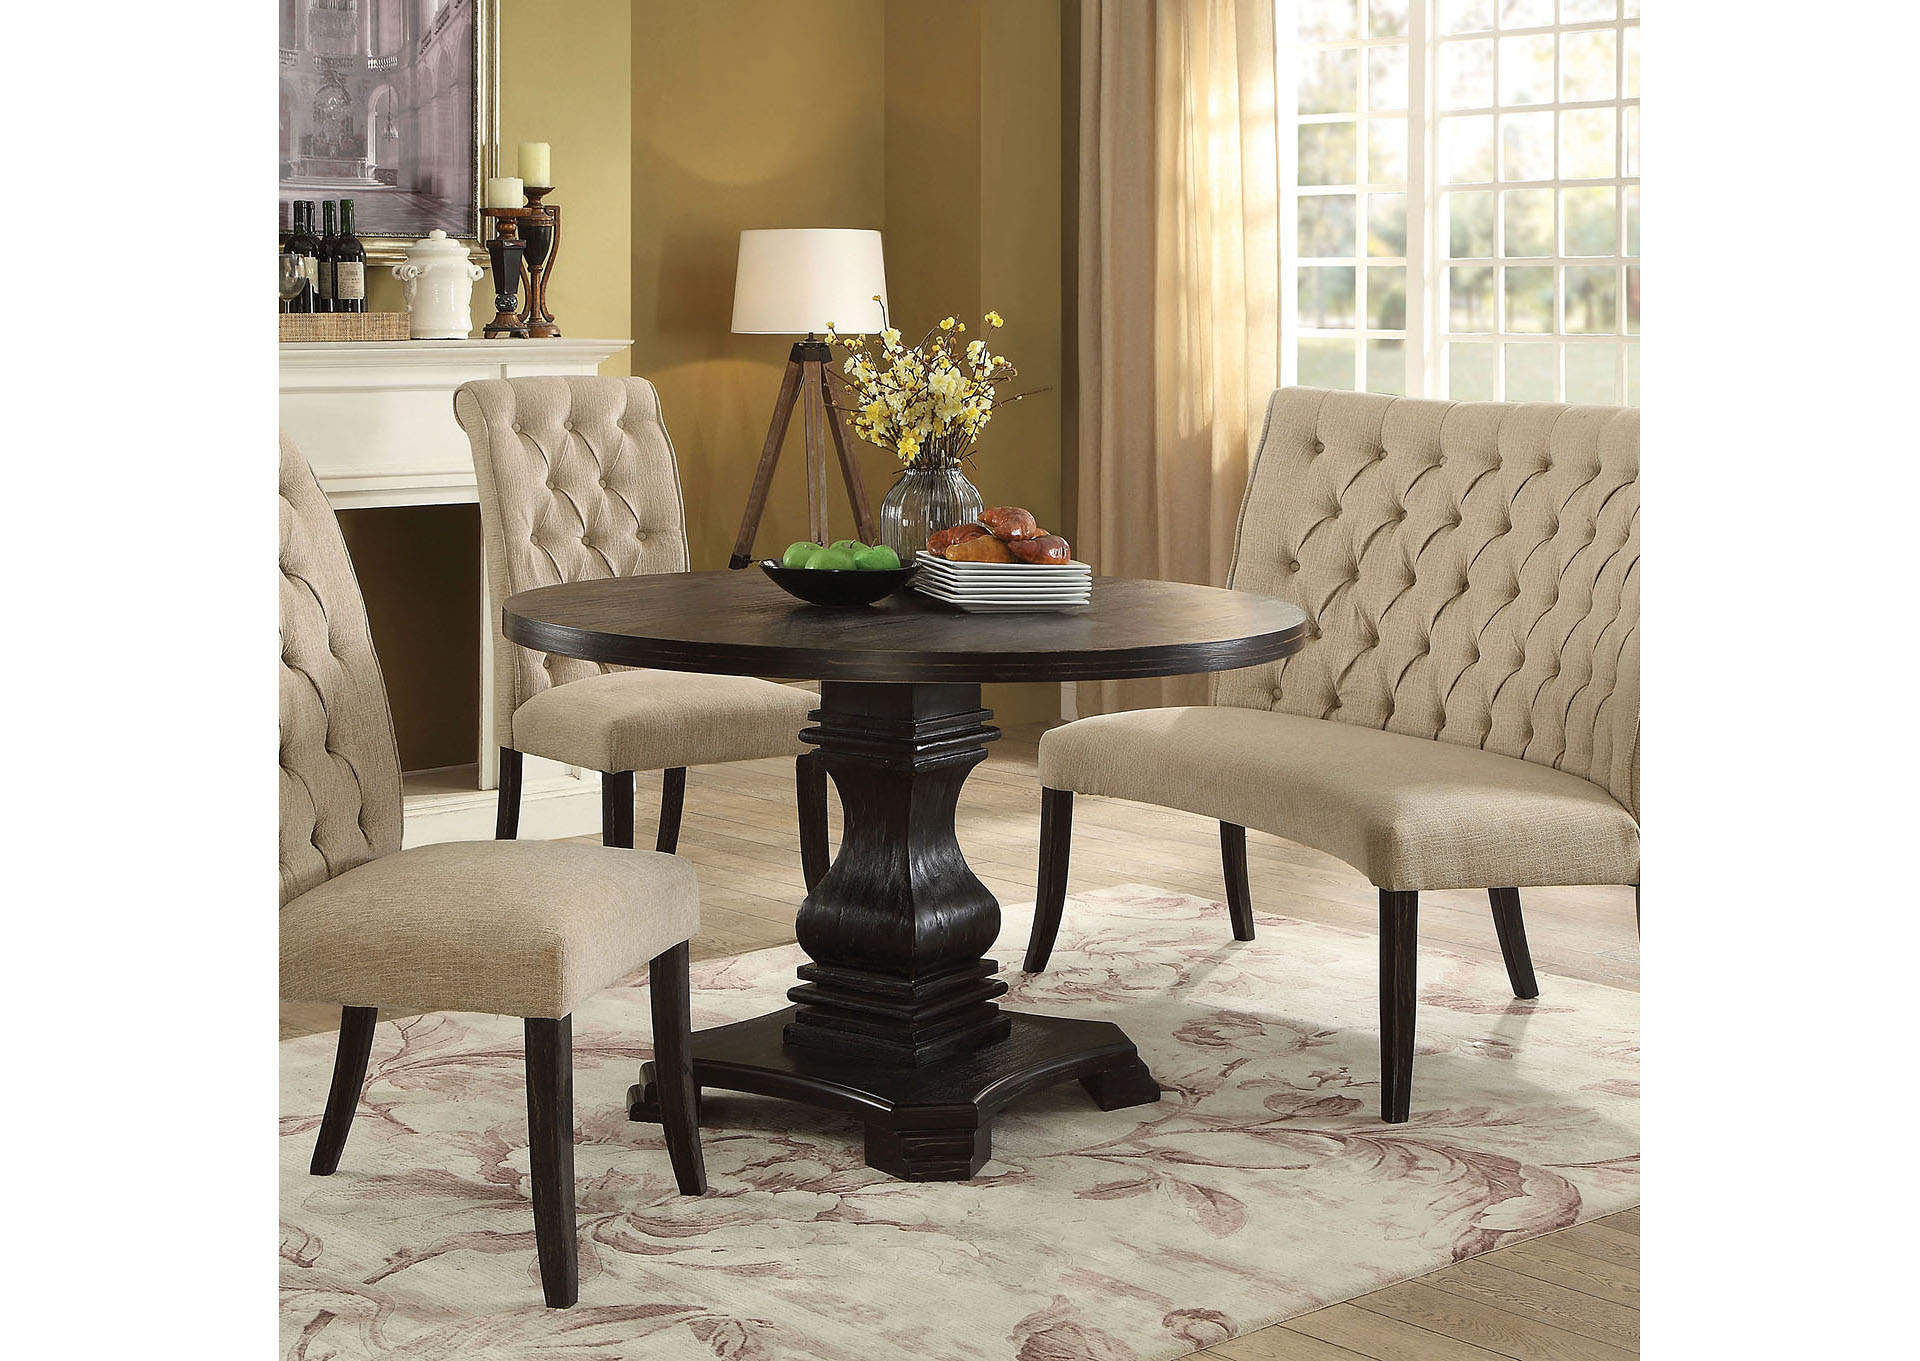 Nerissa Antique Black Dining Table w/4 Side Chair,Furniture of America